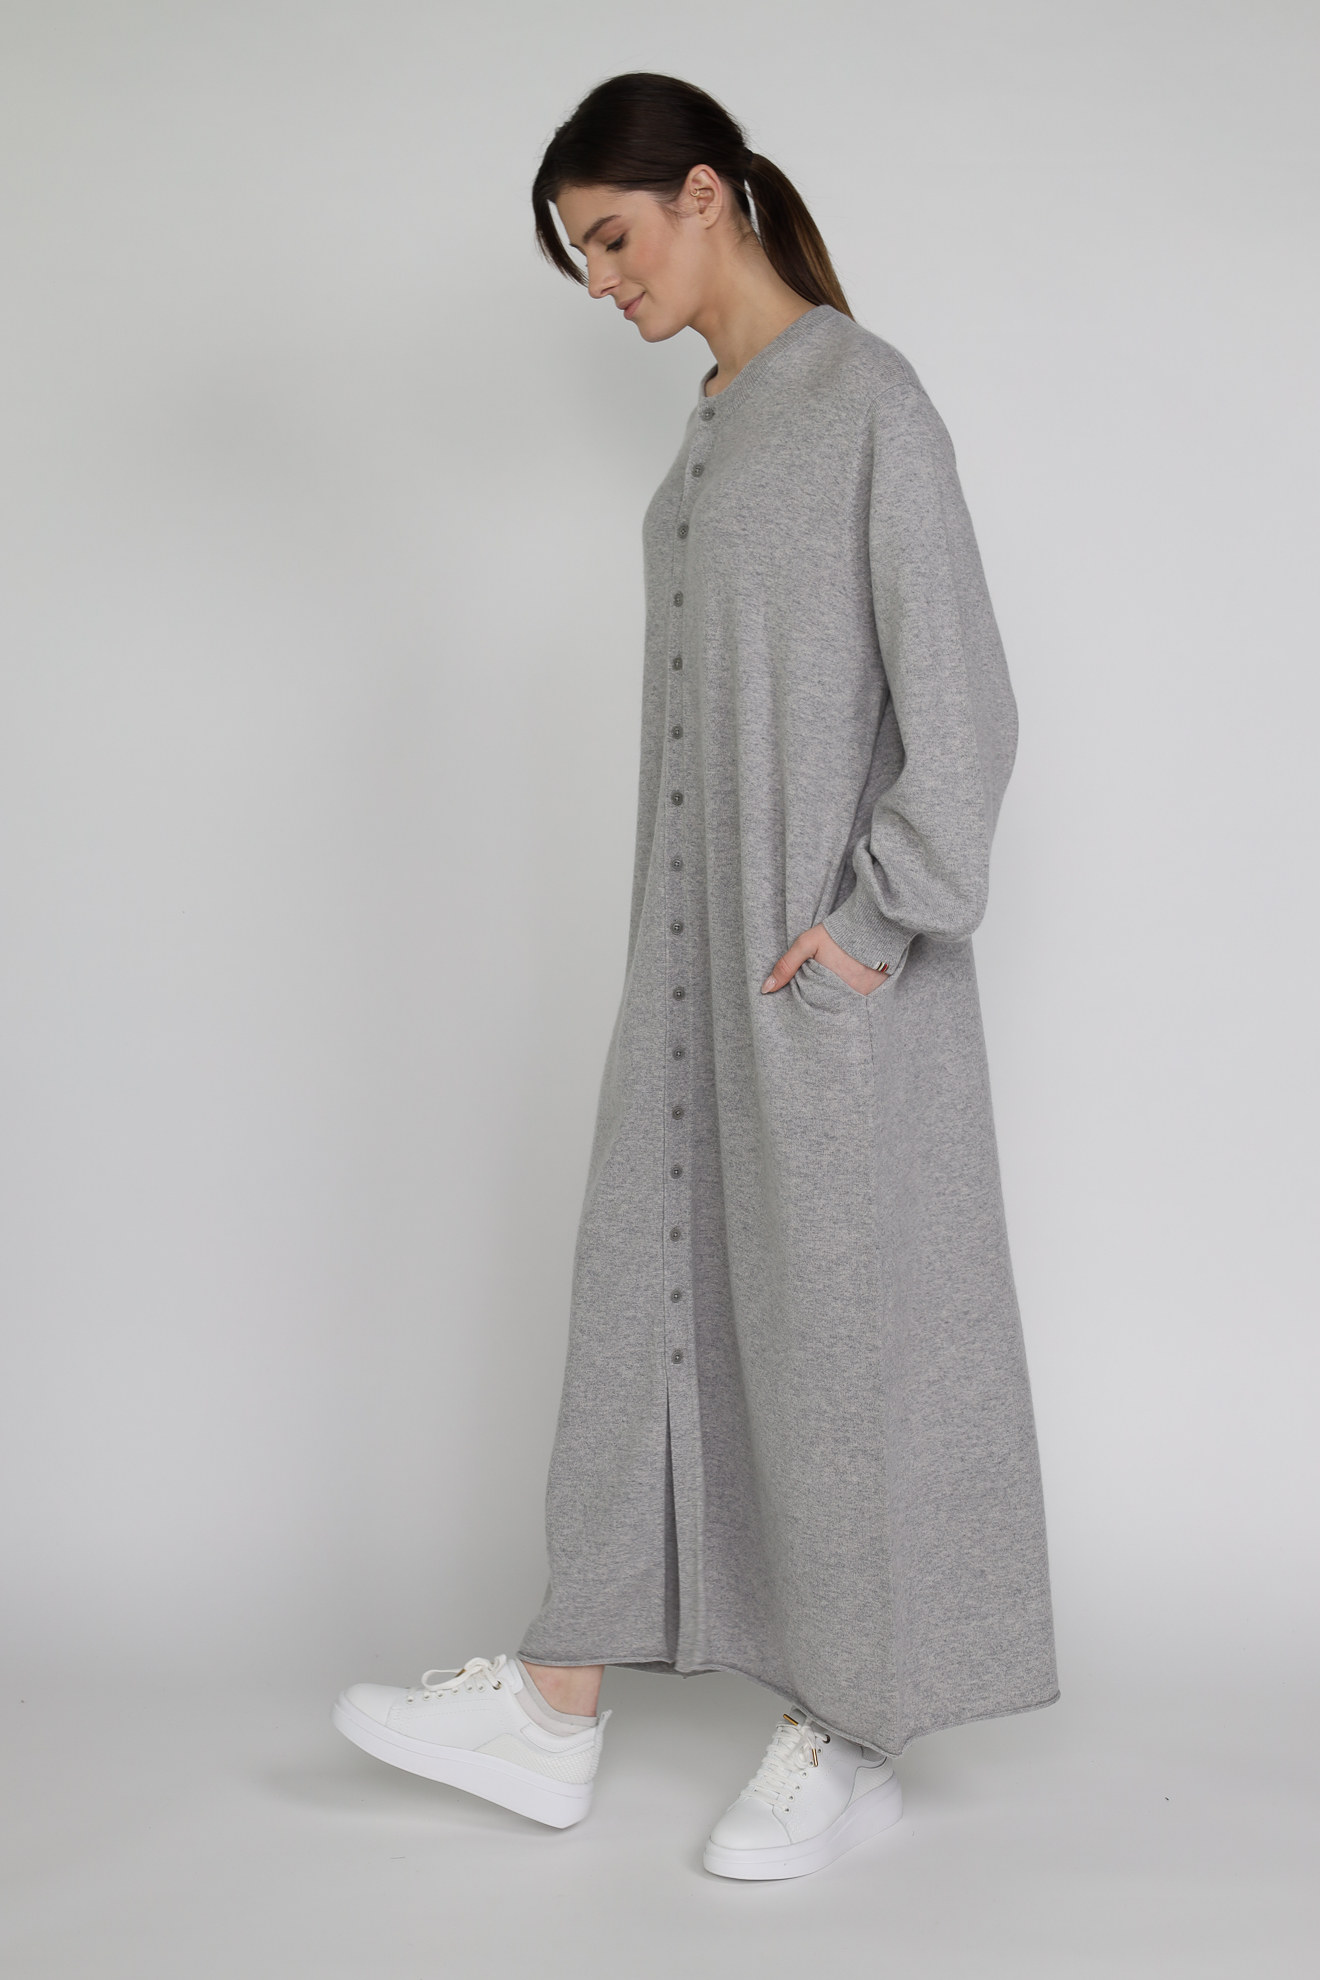 Extreme Cashmere n° 281 Santa - Knitted dress with button placket in cashmere white One Size